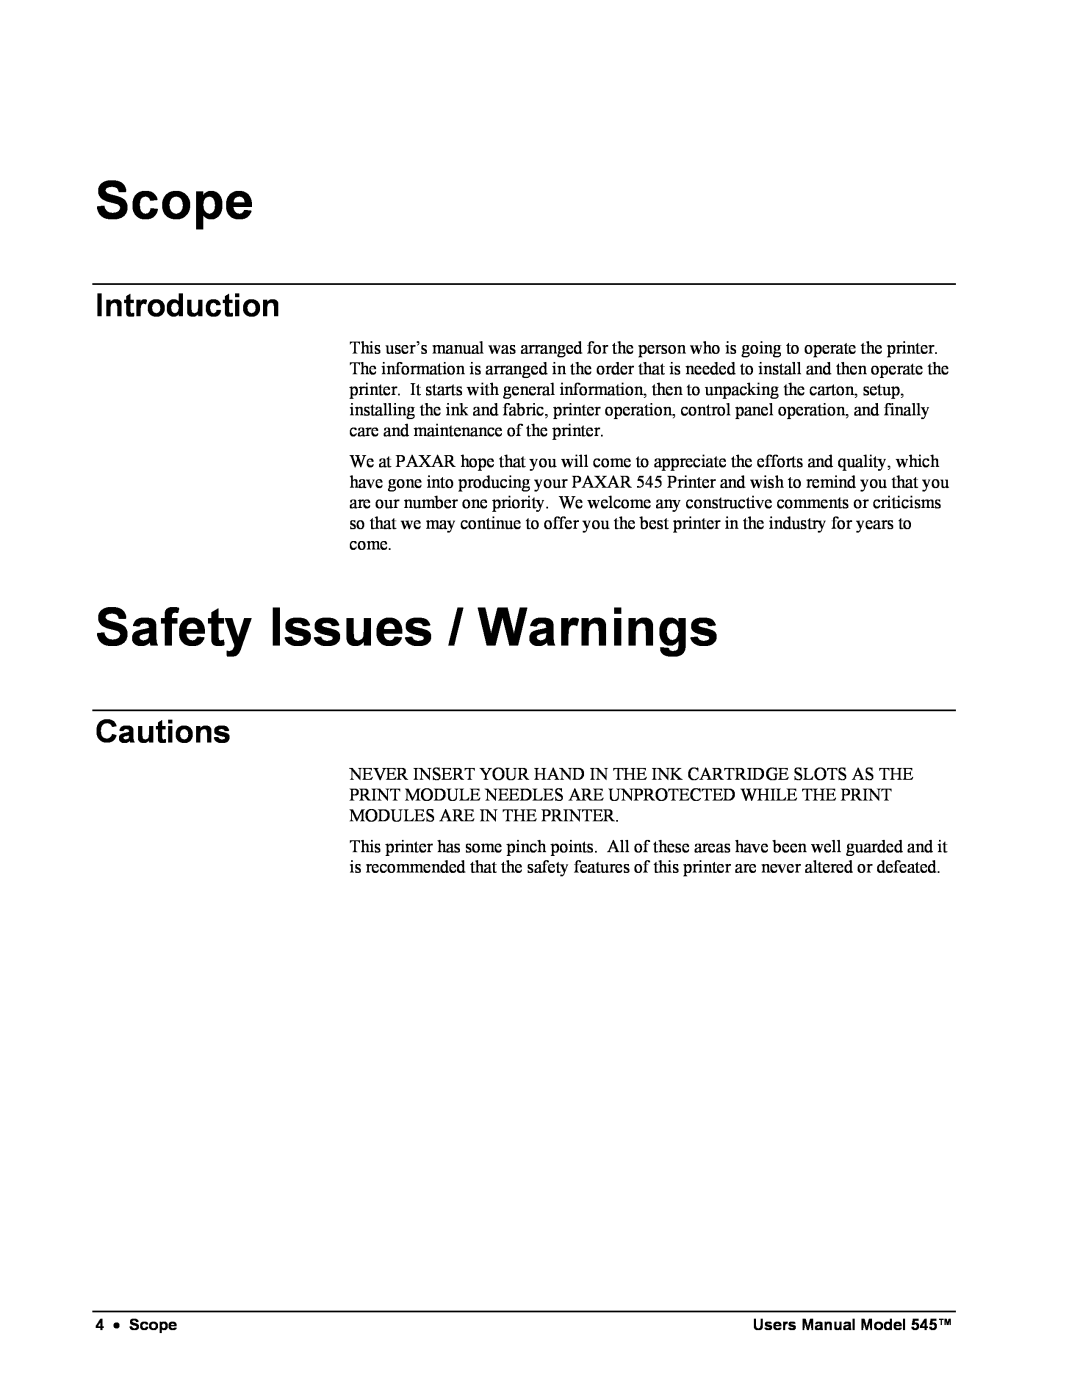 Paxar 545 user manual Scope, Safety Issues / Warnings, Introduction, Cautions 